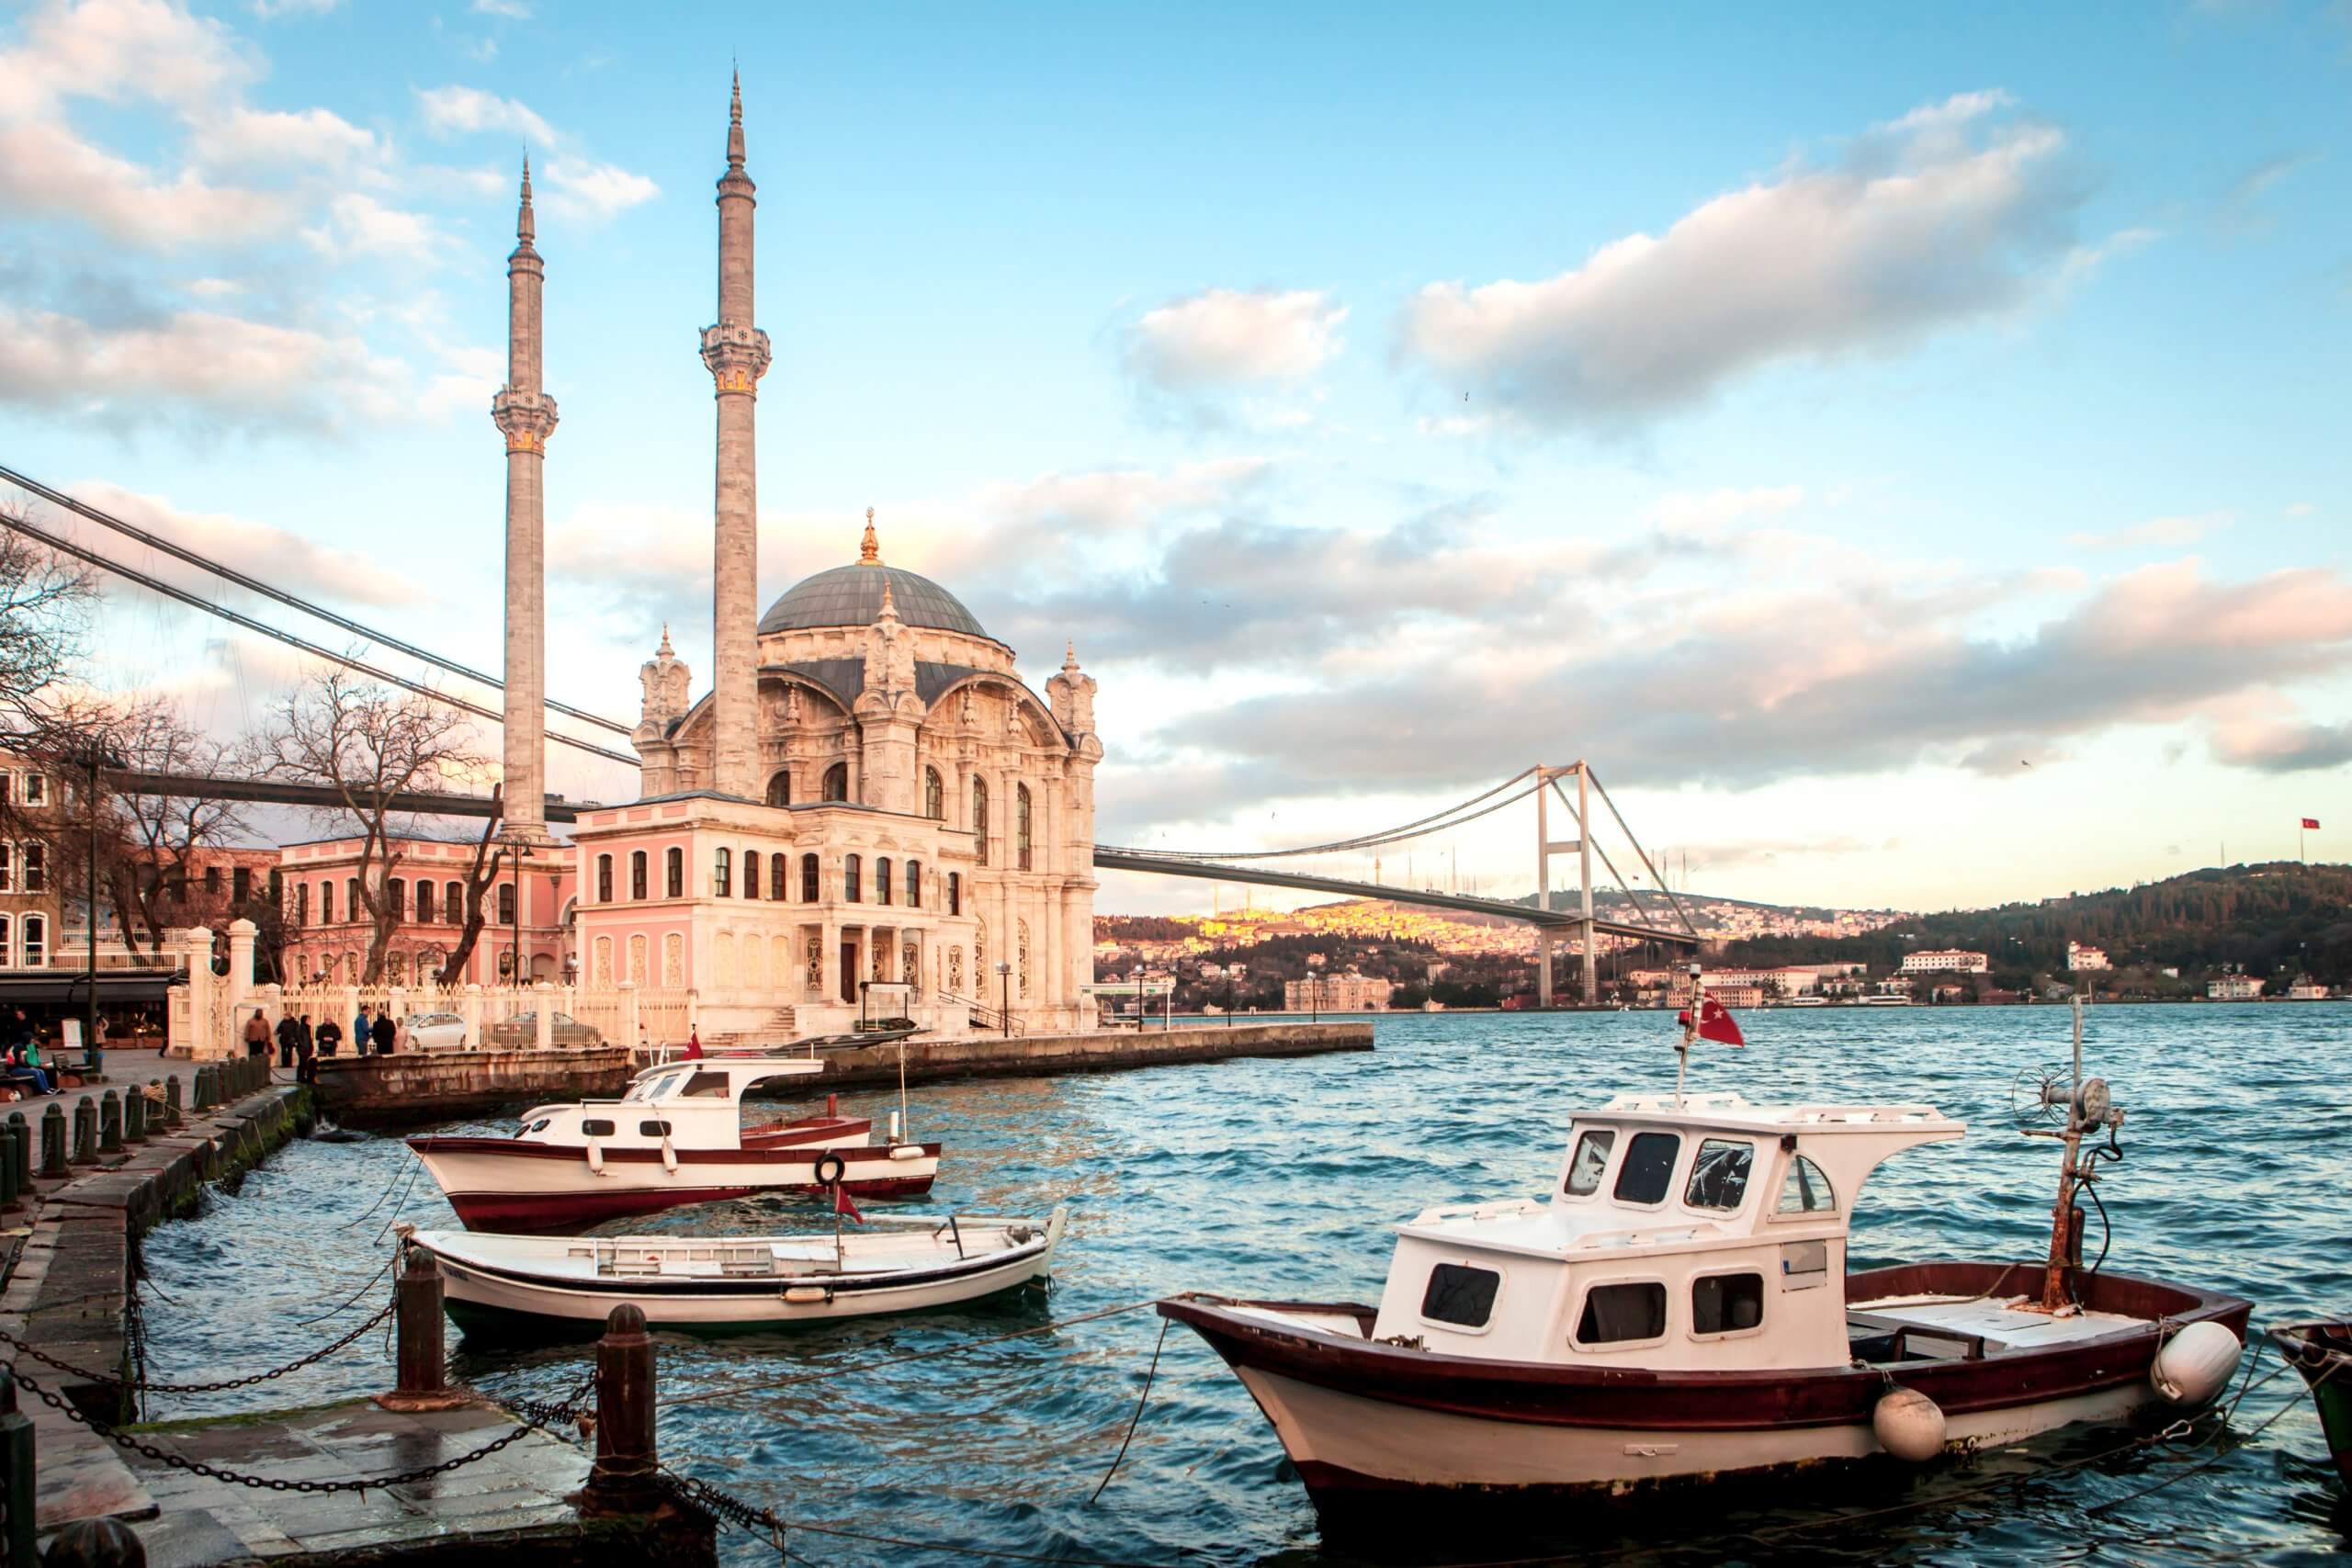 lux travel 34 istanbul